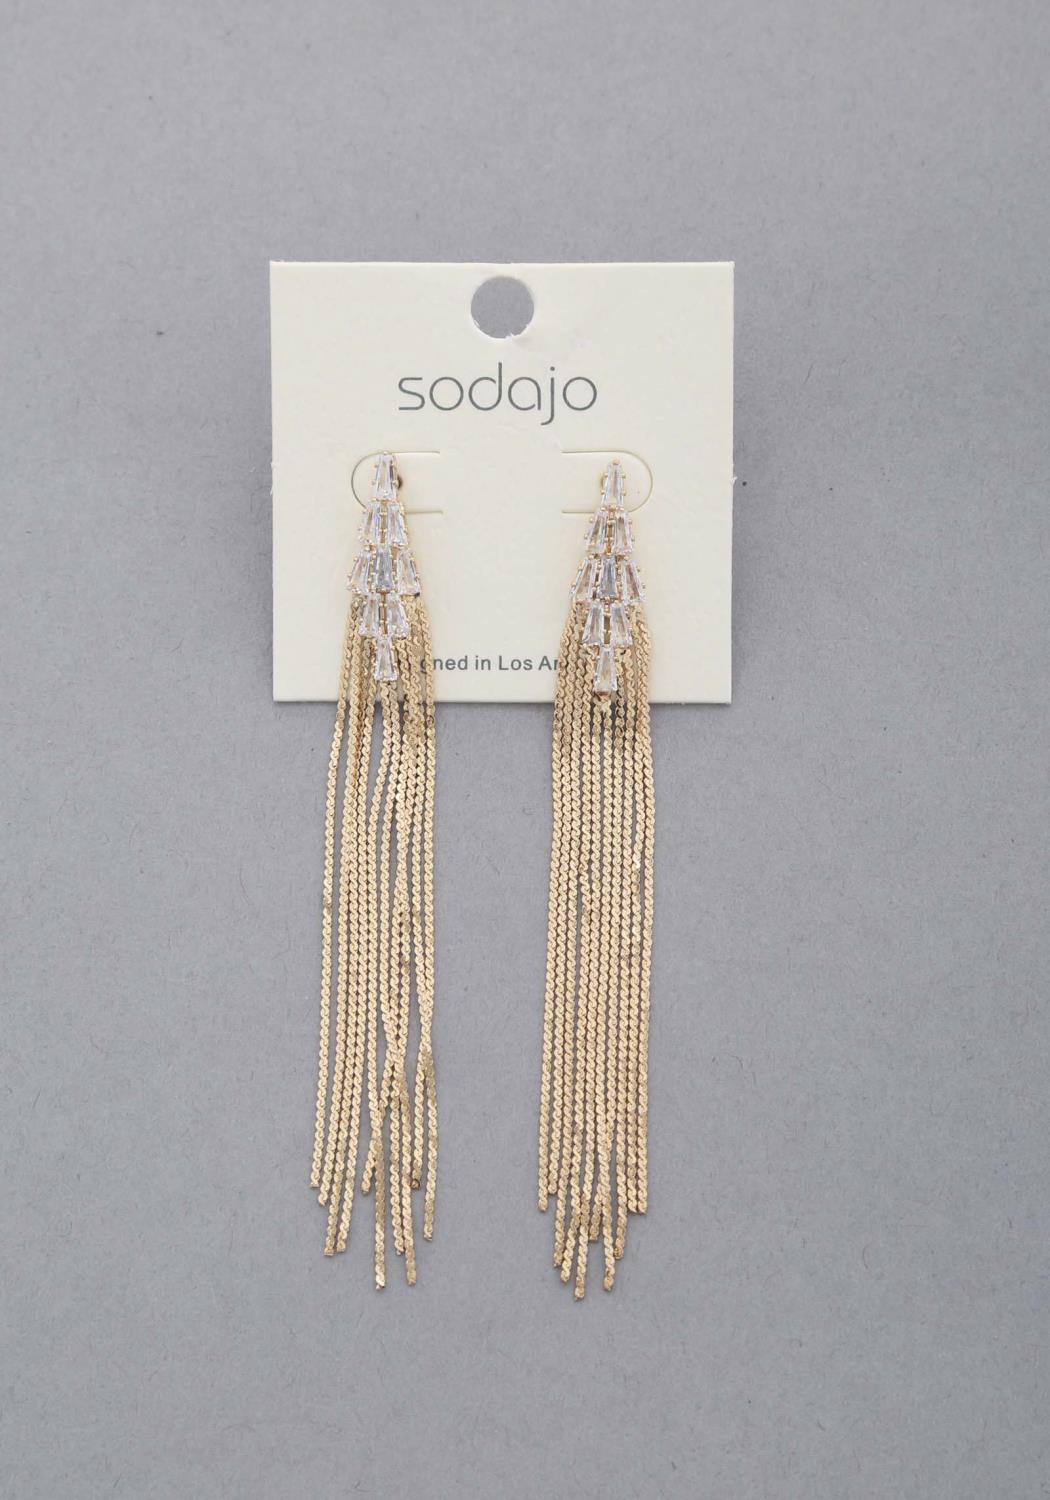 GOLD Sodajo Crystal Metal Chain Dangle Earring - Ships from The US - earrings at TFC&H Co.